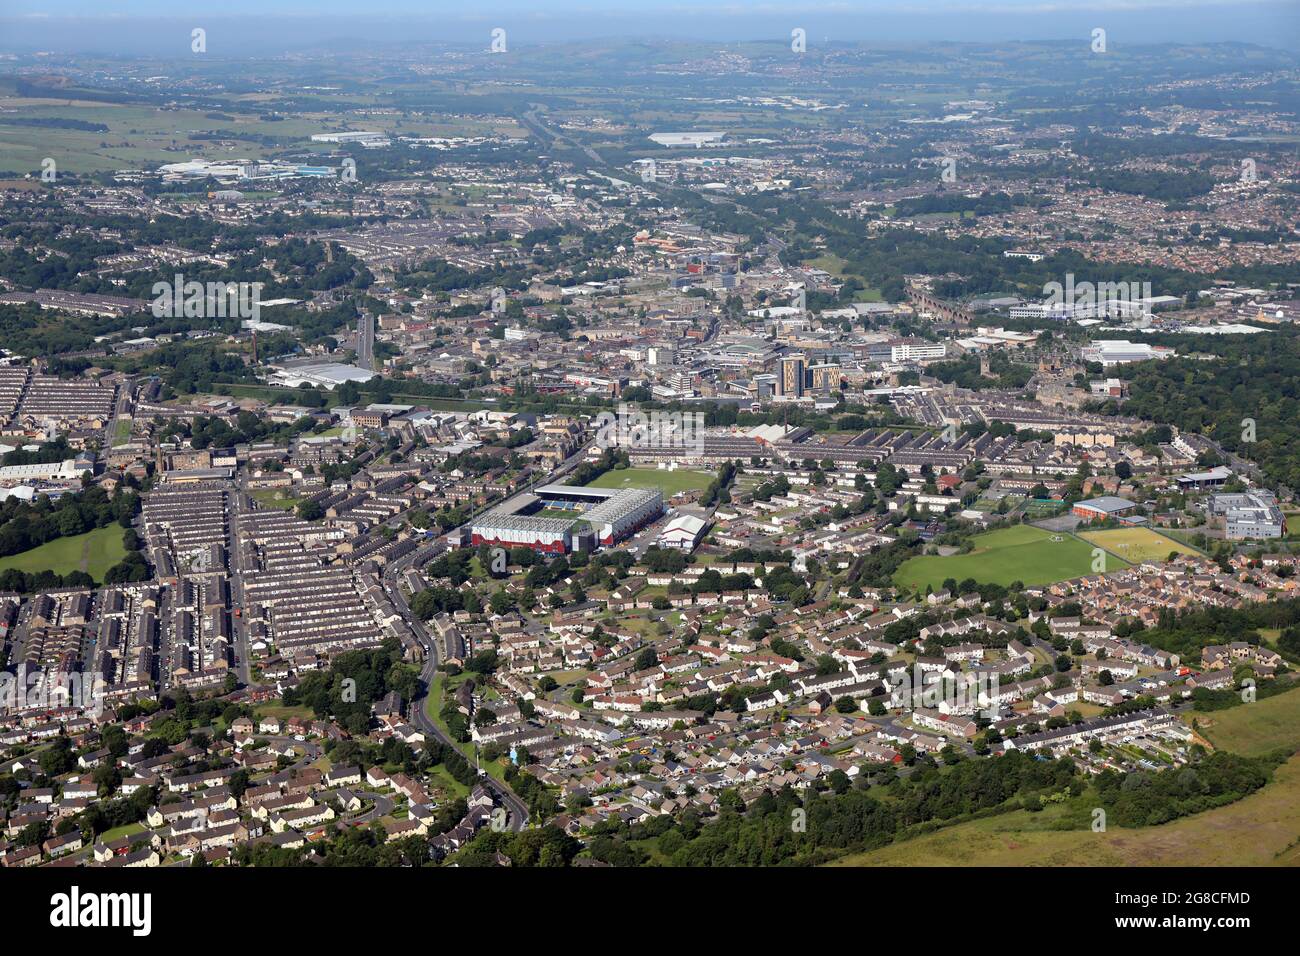 aerial view of the Burnley skyline with Turf Moor football stadium prominent Stock Photo